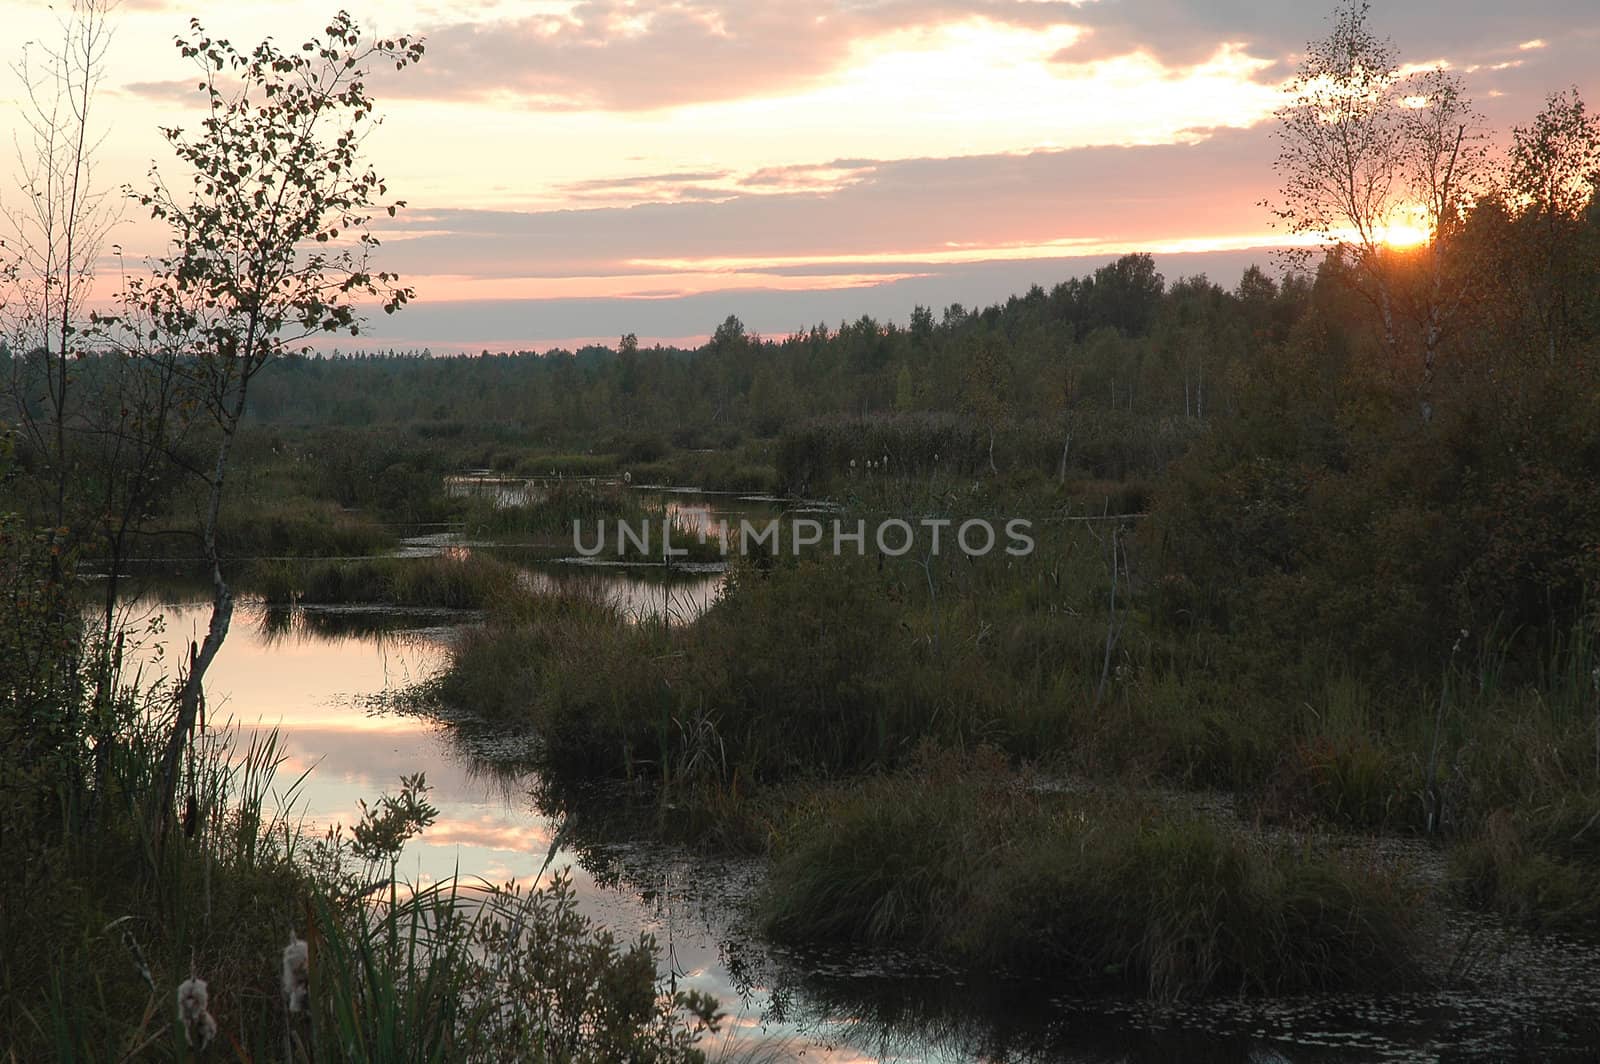 A picture of a bog and its surroundings, taken as the sun is setting in the distance.